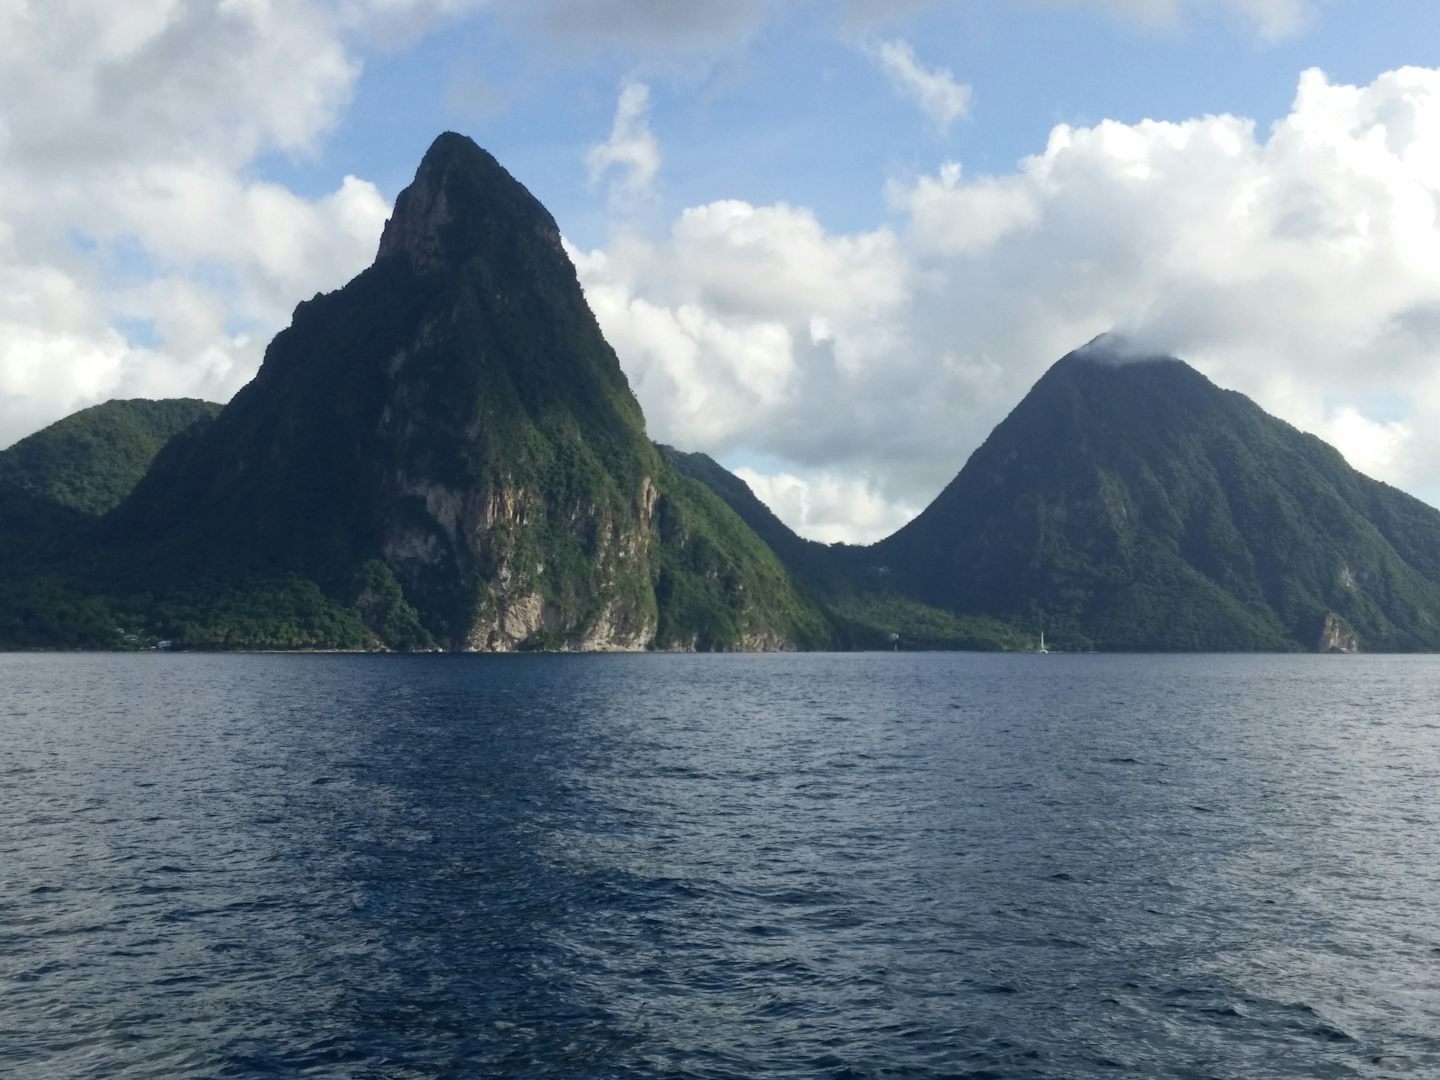 The Pitons (World Heritage Site) in St. Lucia.